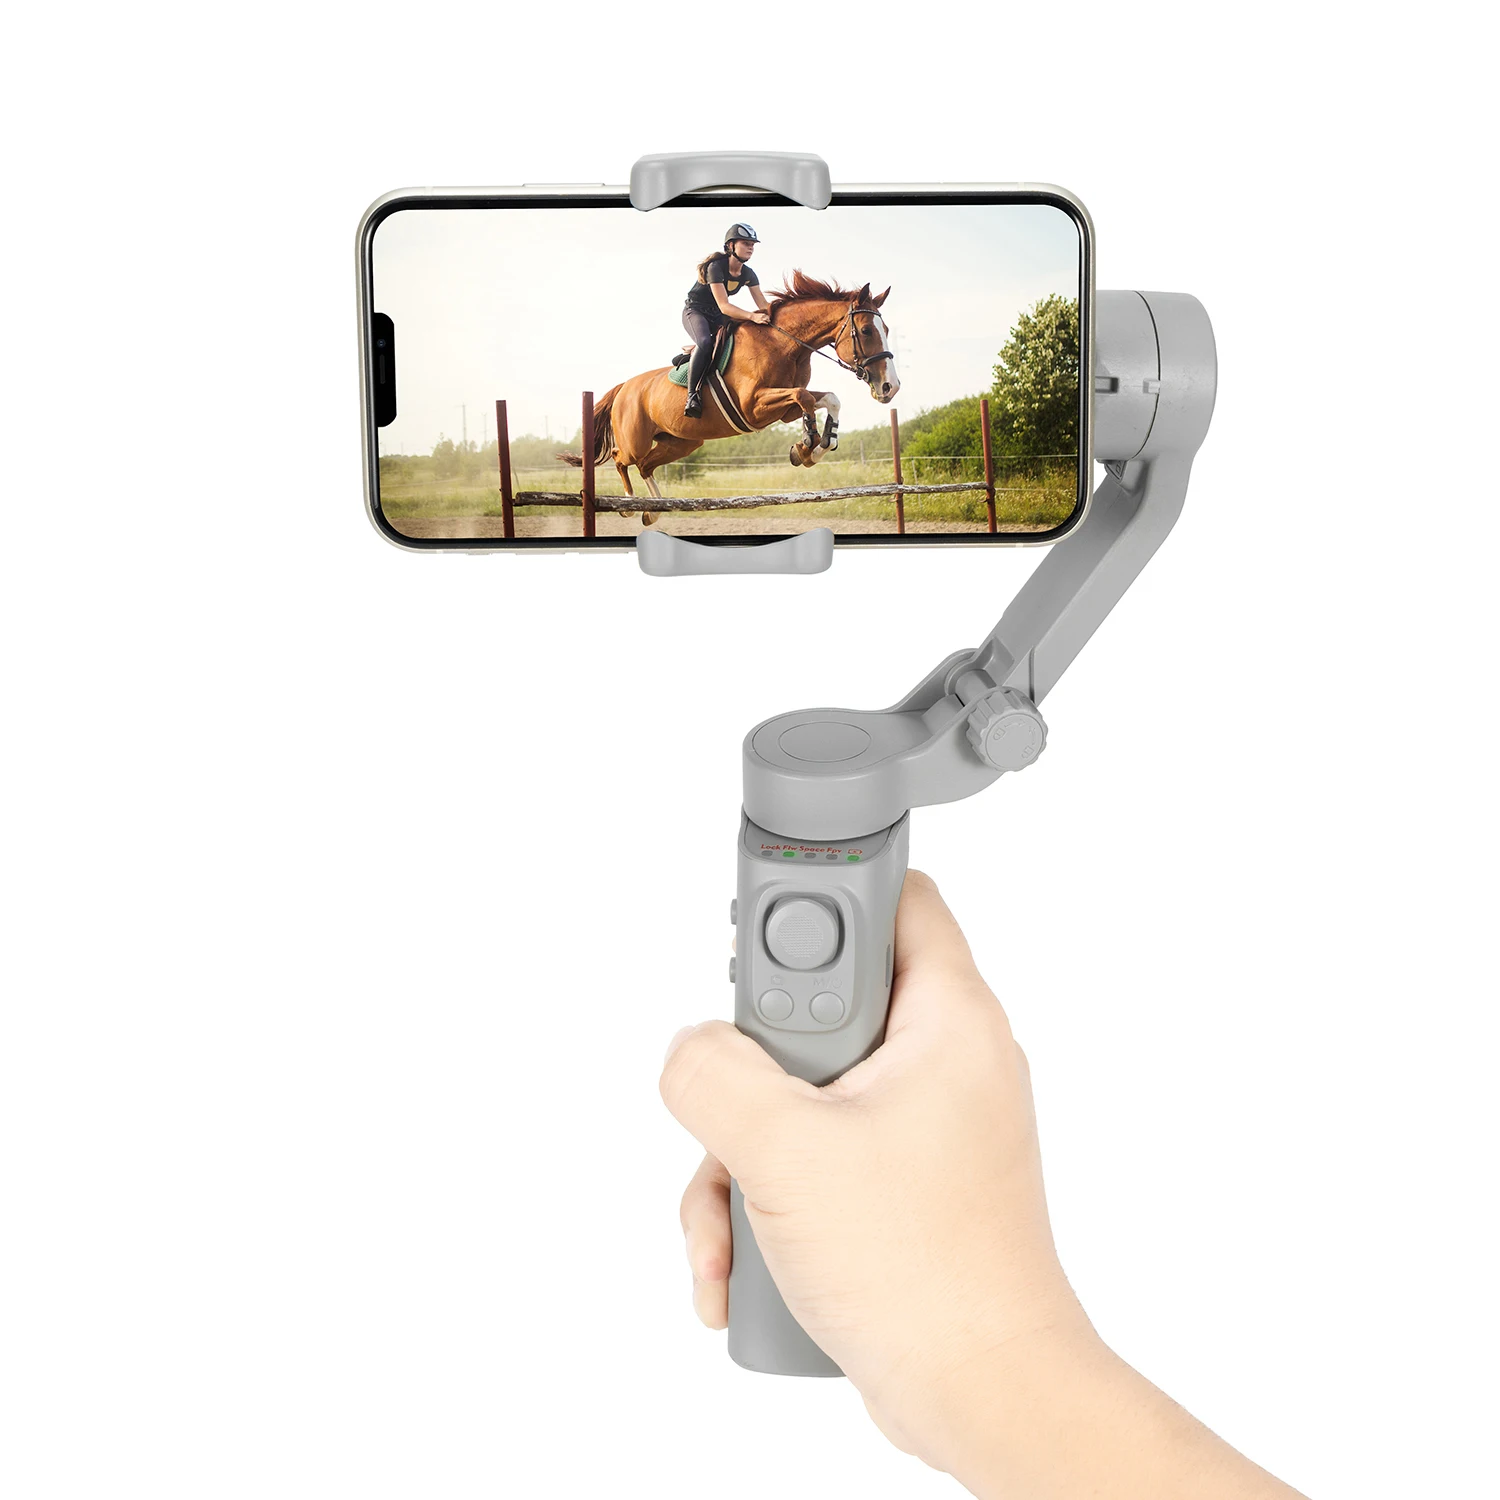 

New Arrival F5 3 Axis 360 Rotation Phone Gimbal Stabilizer Smart Auto Tracking Foldable Phone Gimbal Stabilizer